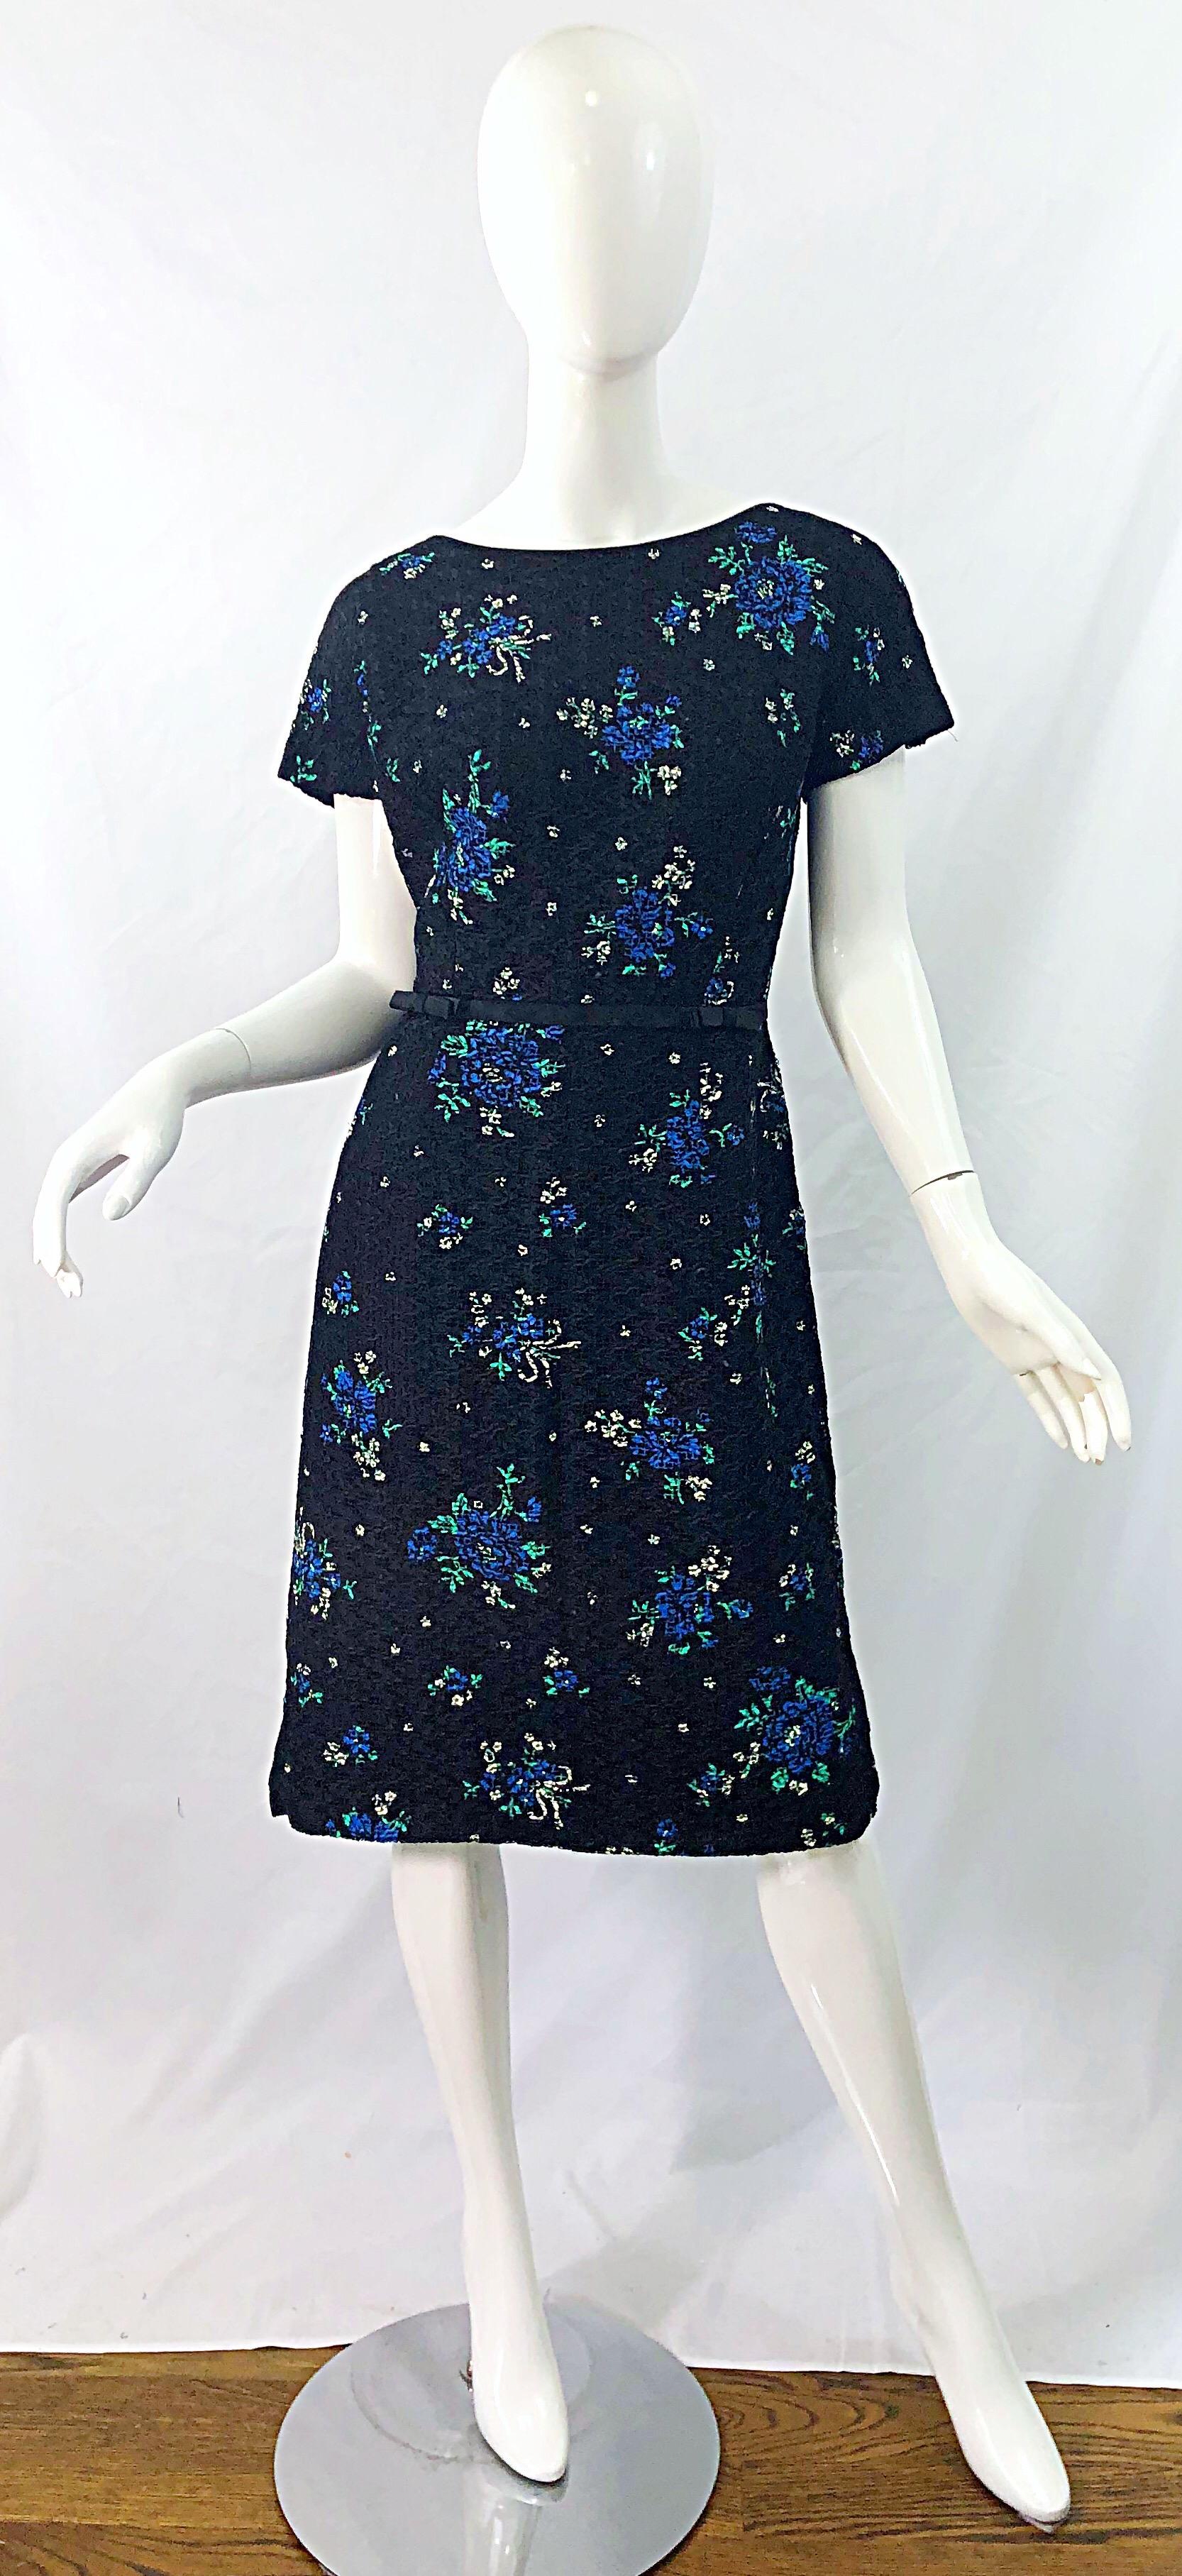 Beautiful couture quality 1950s large size woven silk ribbon hand painted dress ! Features a flattering tailored bodice with a forgiving skirt. Hand painted flowers in blue, turquoise and white throughout. Silk ribbon is hand woven. Fully lined.